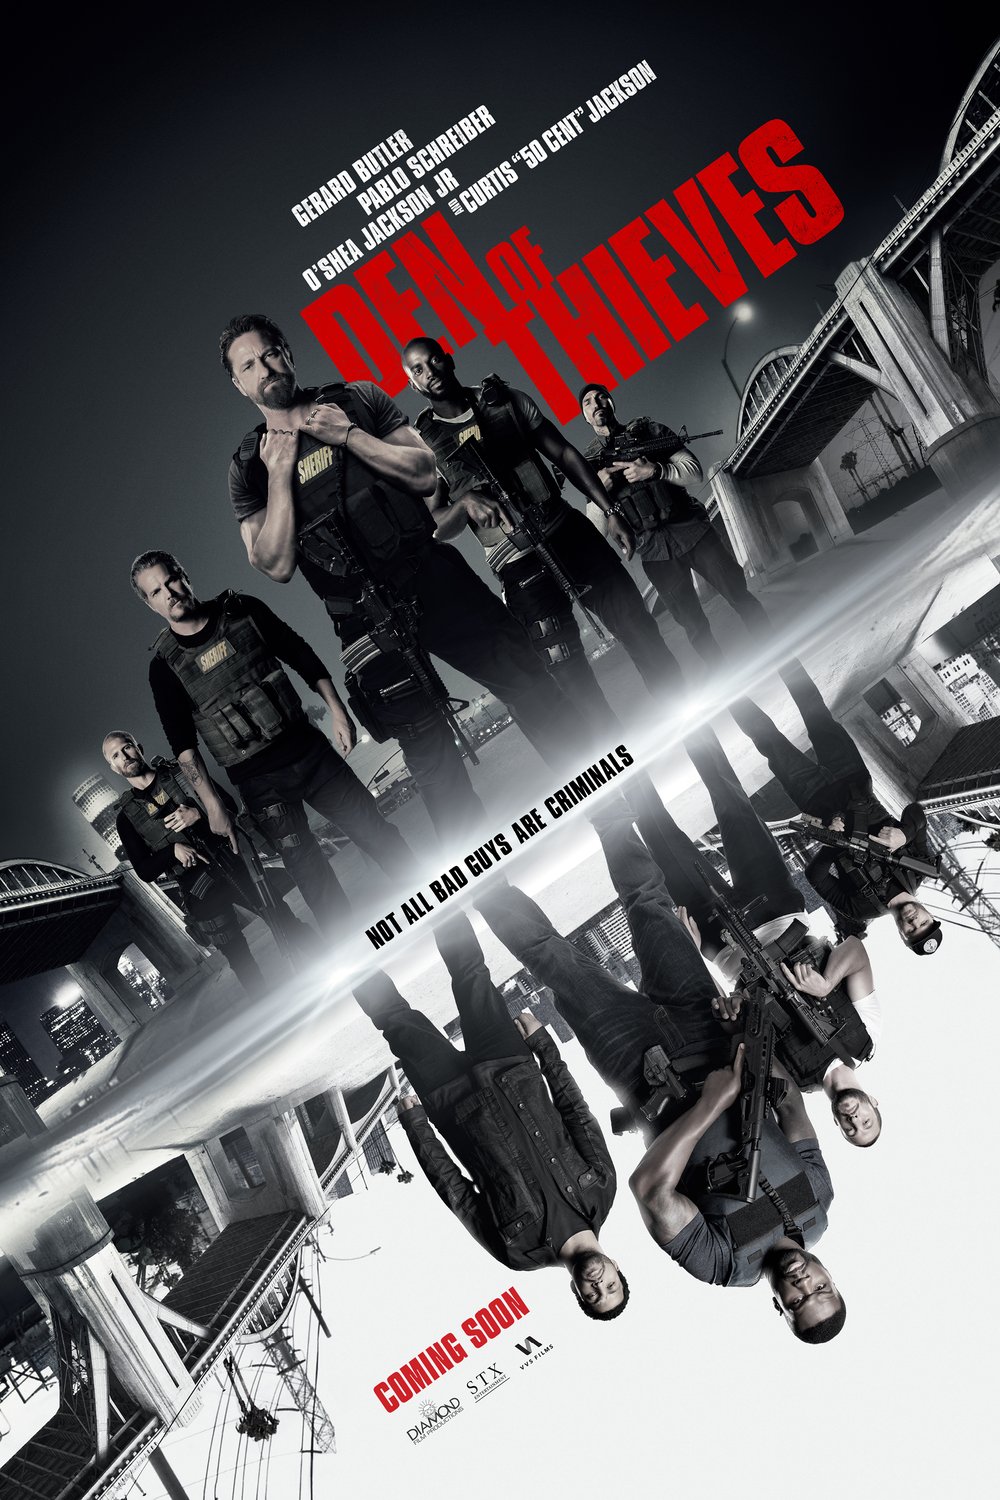 Poster of the movie Den of Thieves